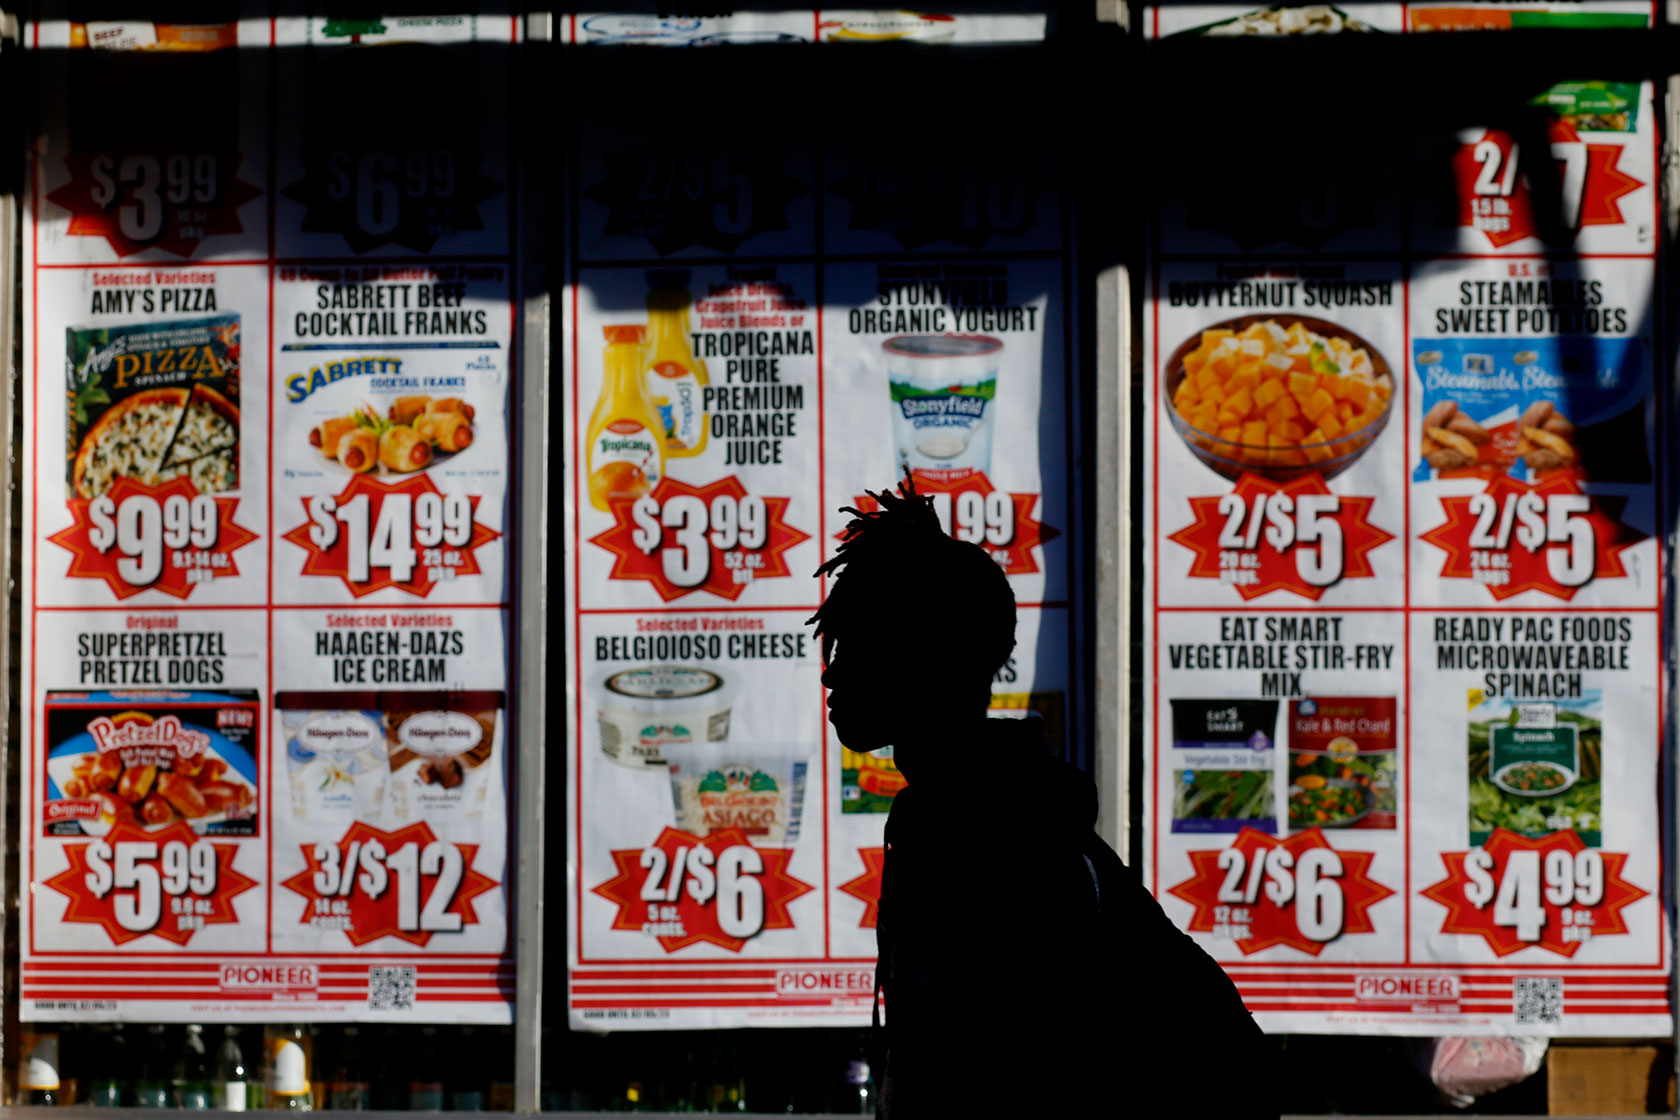 Photo shows a silhouette of a person walking past a window display with rows of signs displaying photos of foods and their associated prices